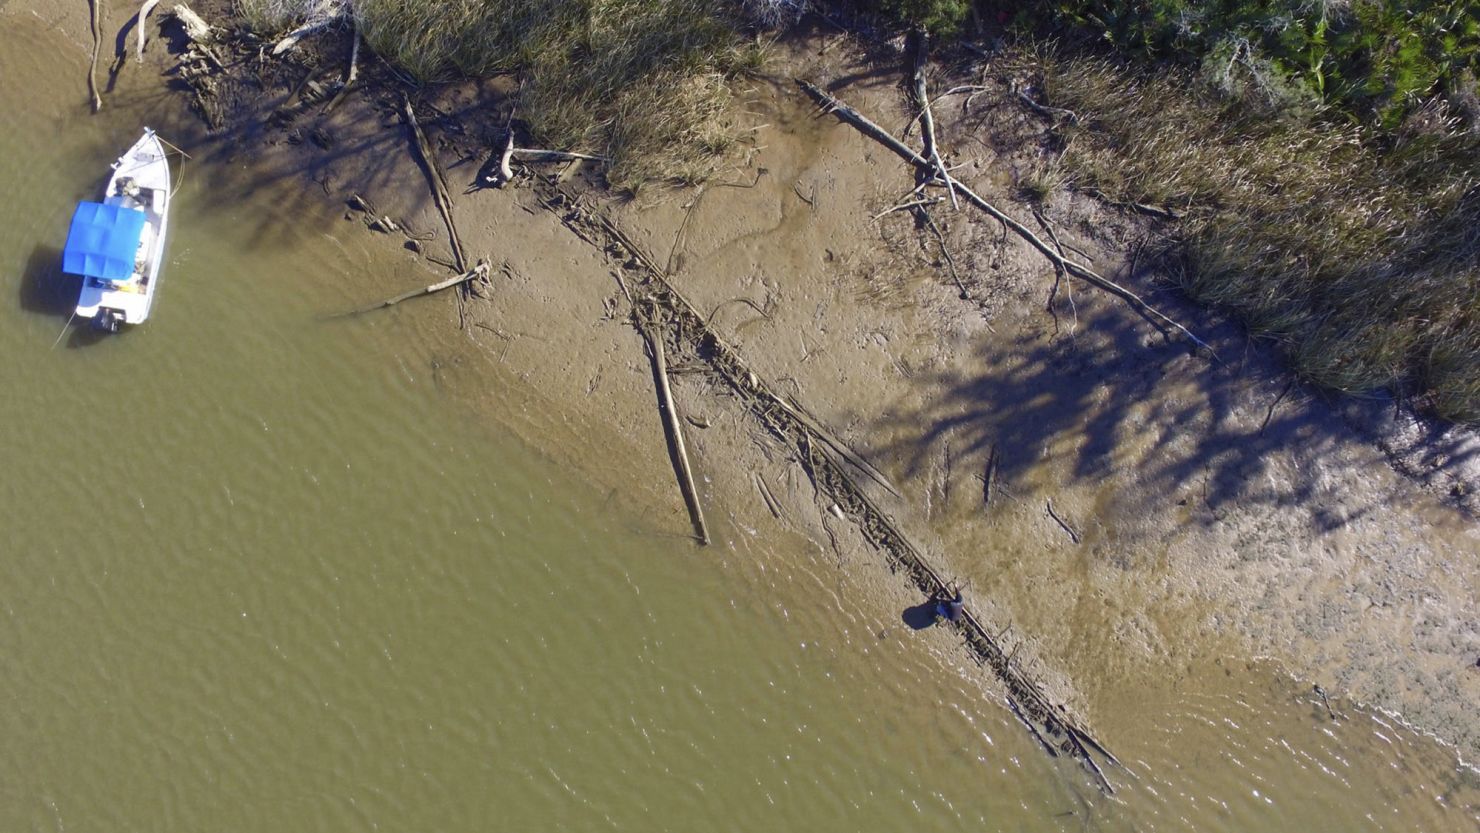 This aerial photo shows the remains of what may be the Clotilda, the last slave ship documented to have delivered captive Africans to the United States. The long spine is the ship's starboard side.